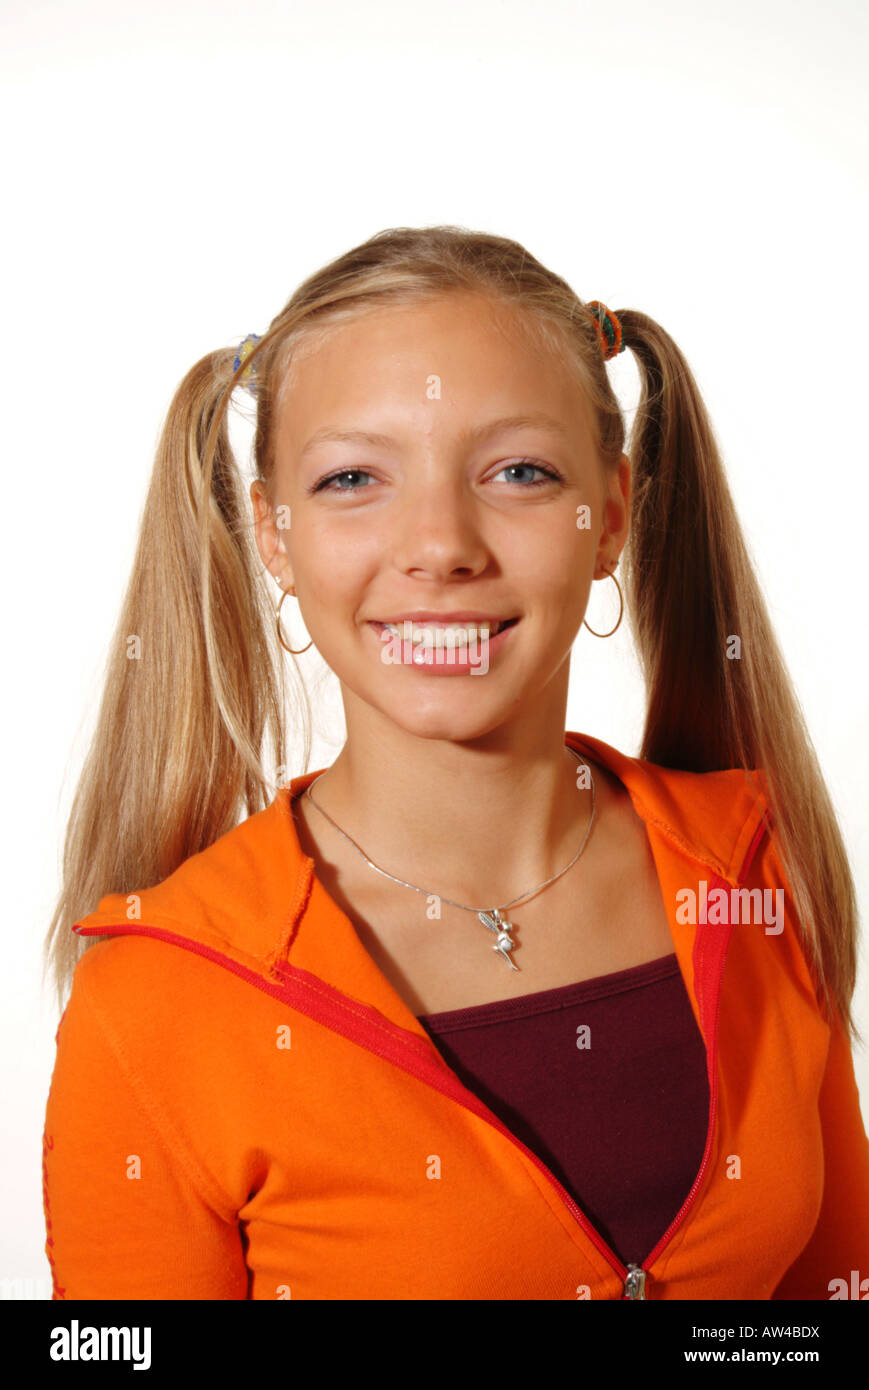 Laughing teenager with braids and orange jumper. Young woman. Girl. Stock Photo